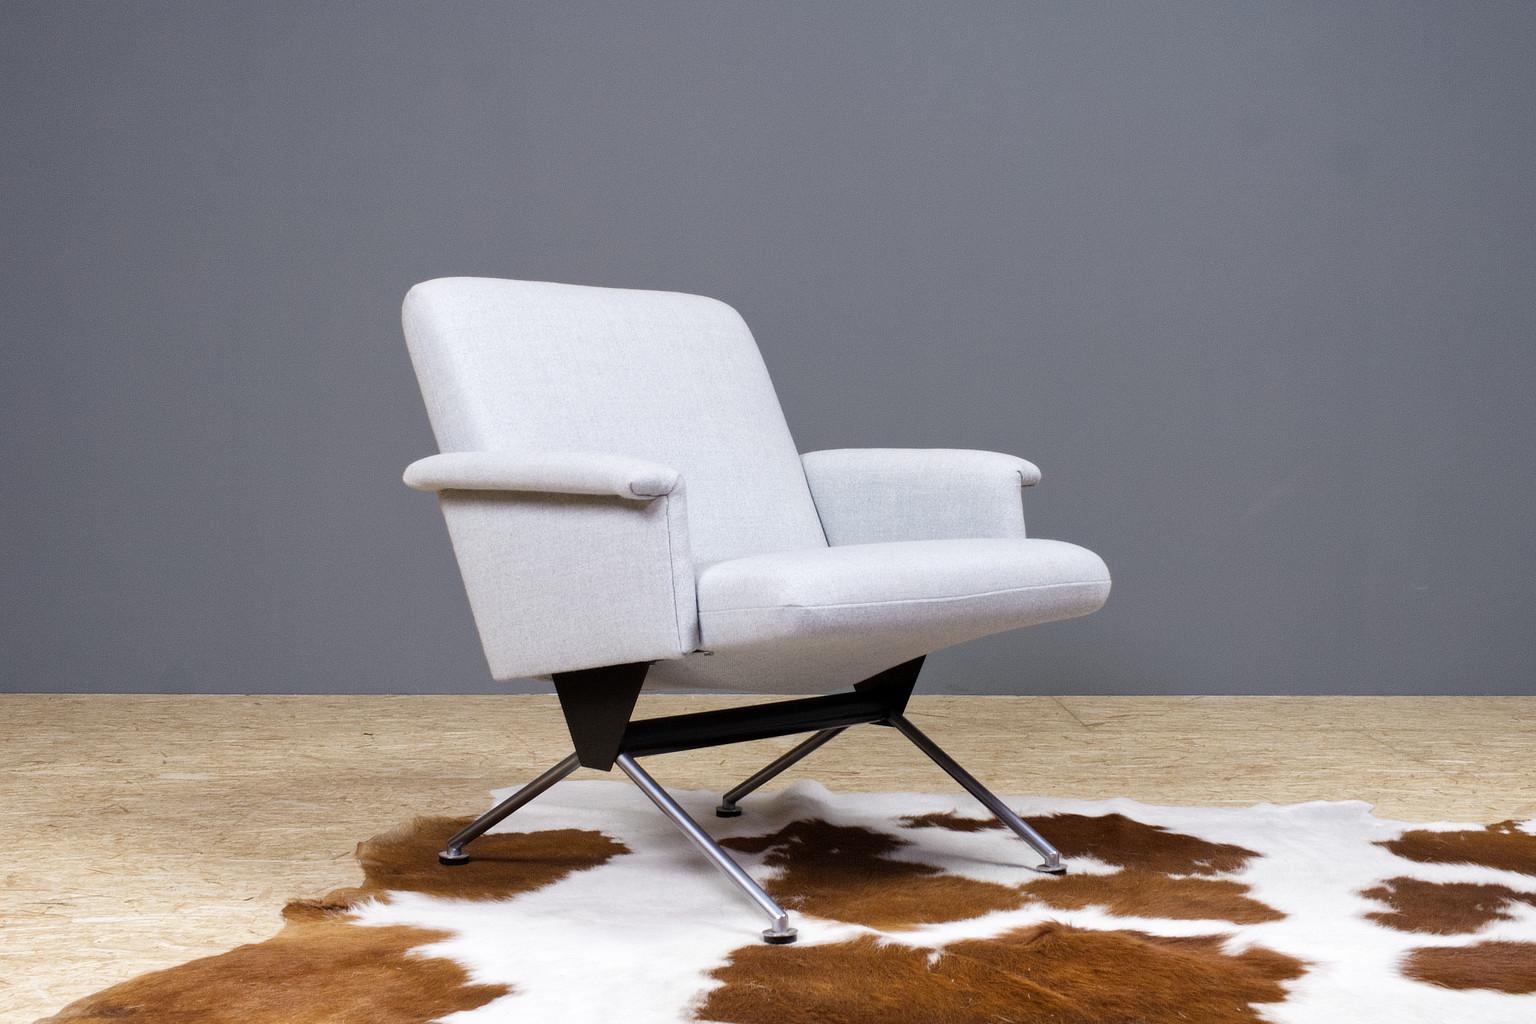 Dutch vintage Andre Cordemeyer lounge chair, model 1432, yet completely re-upholstered in e light grey high quality wool fabric (Ploegwool by de Ploeg). Cordemeyer designed this (executive) chair in 1961 for Gispen. The chromed metal frame with the